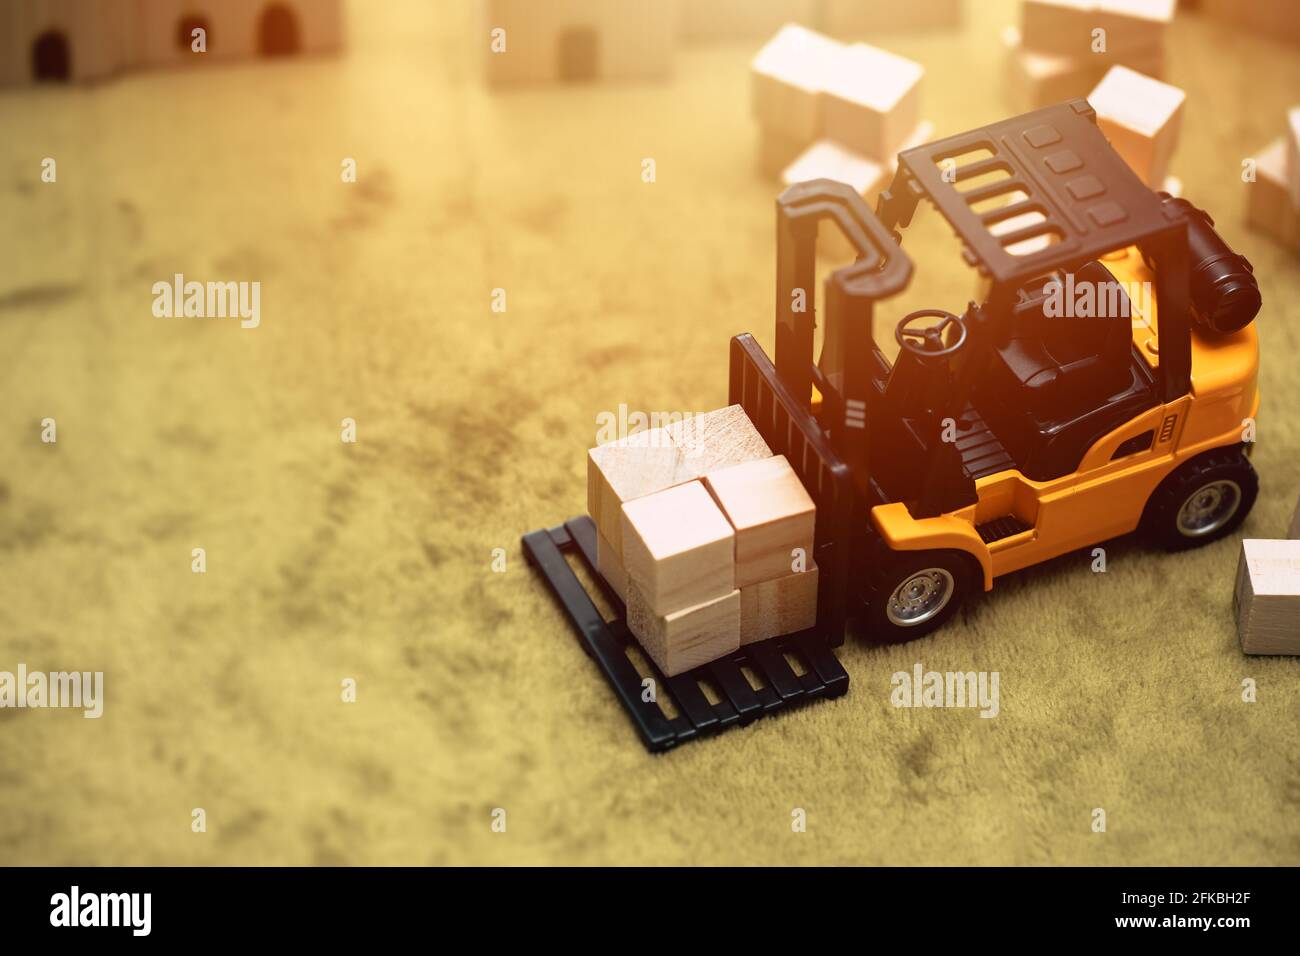 small model of forklift car working moving goods cargo for transport shipping and inventory business industry background concept Stock Photo